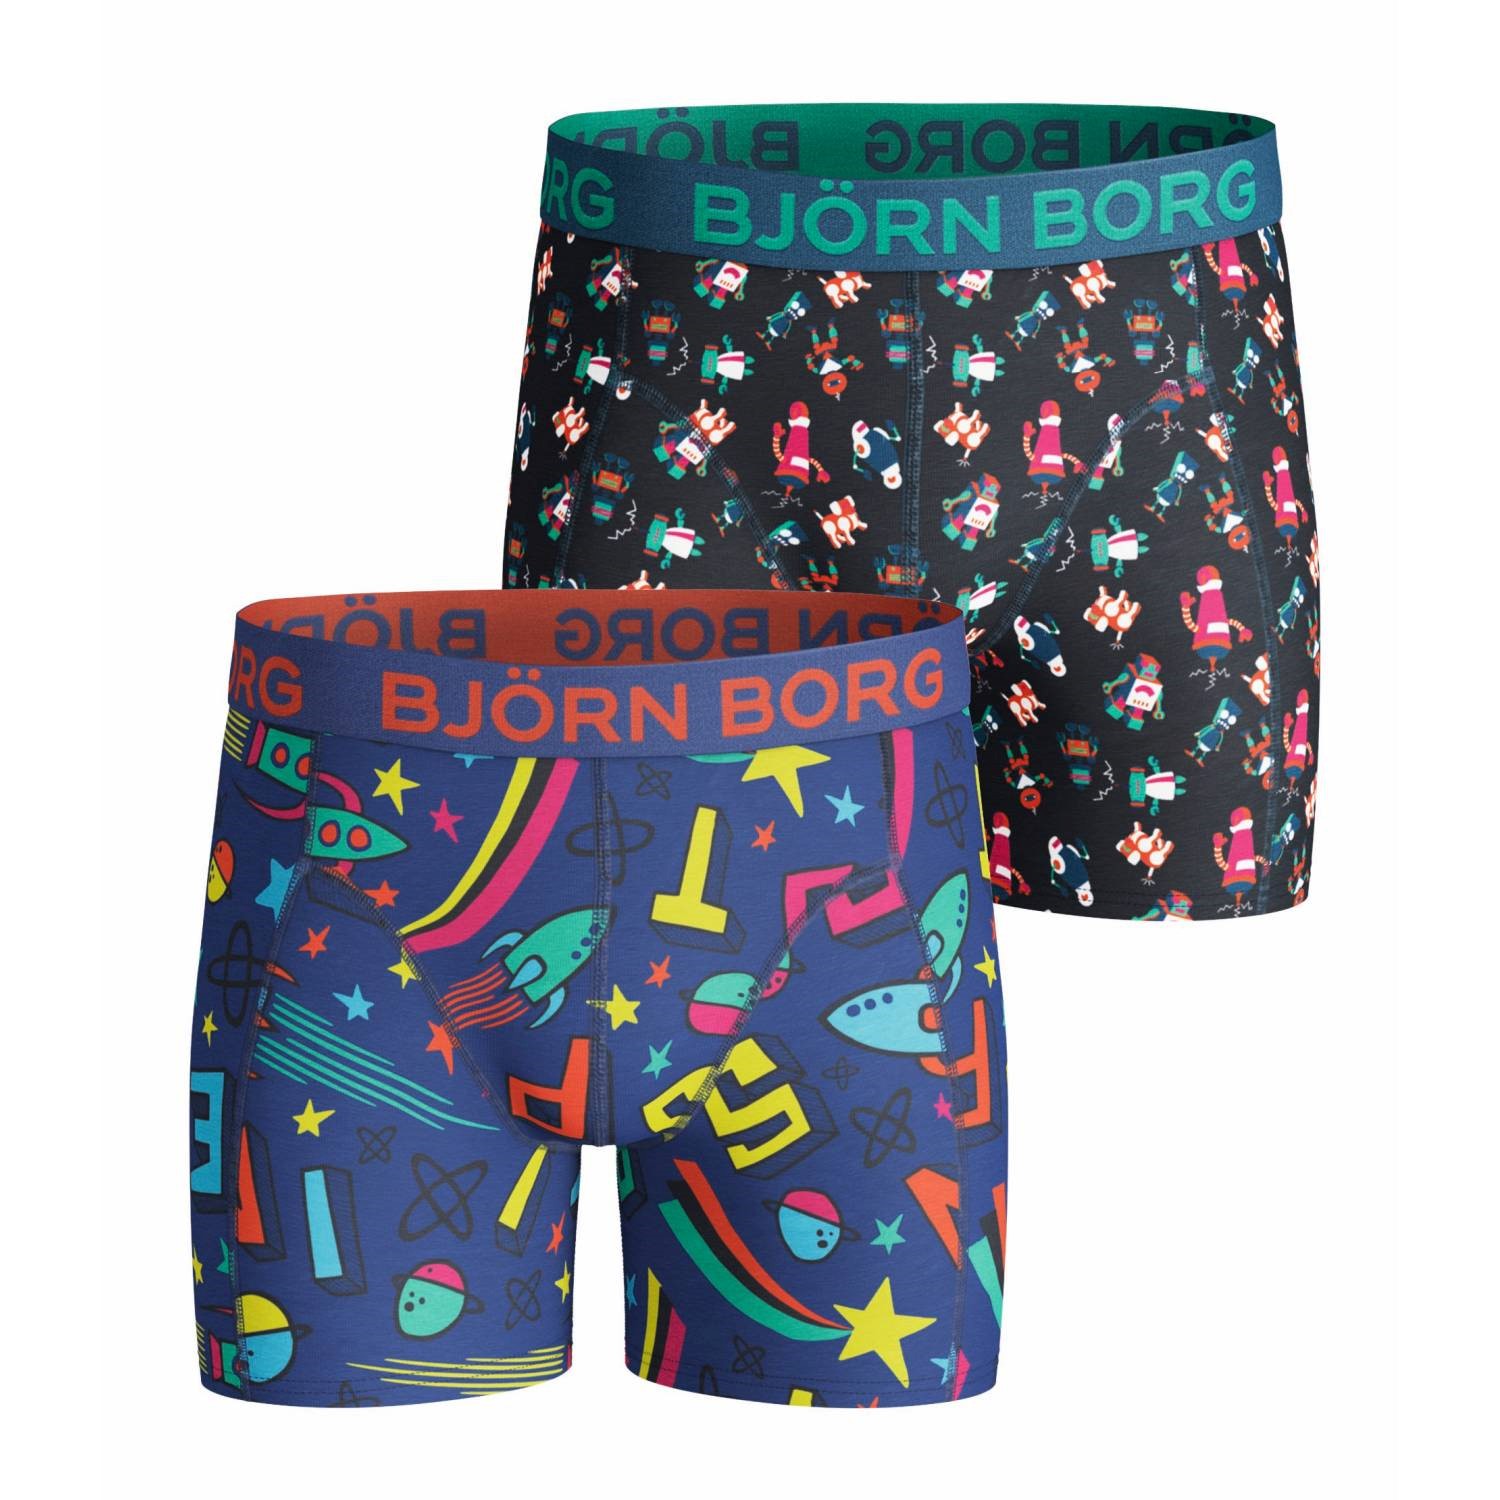 Björn Borg Lost And Robo Shorts For Boys